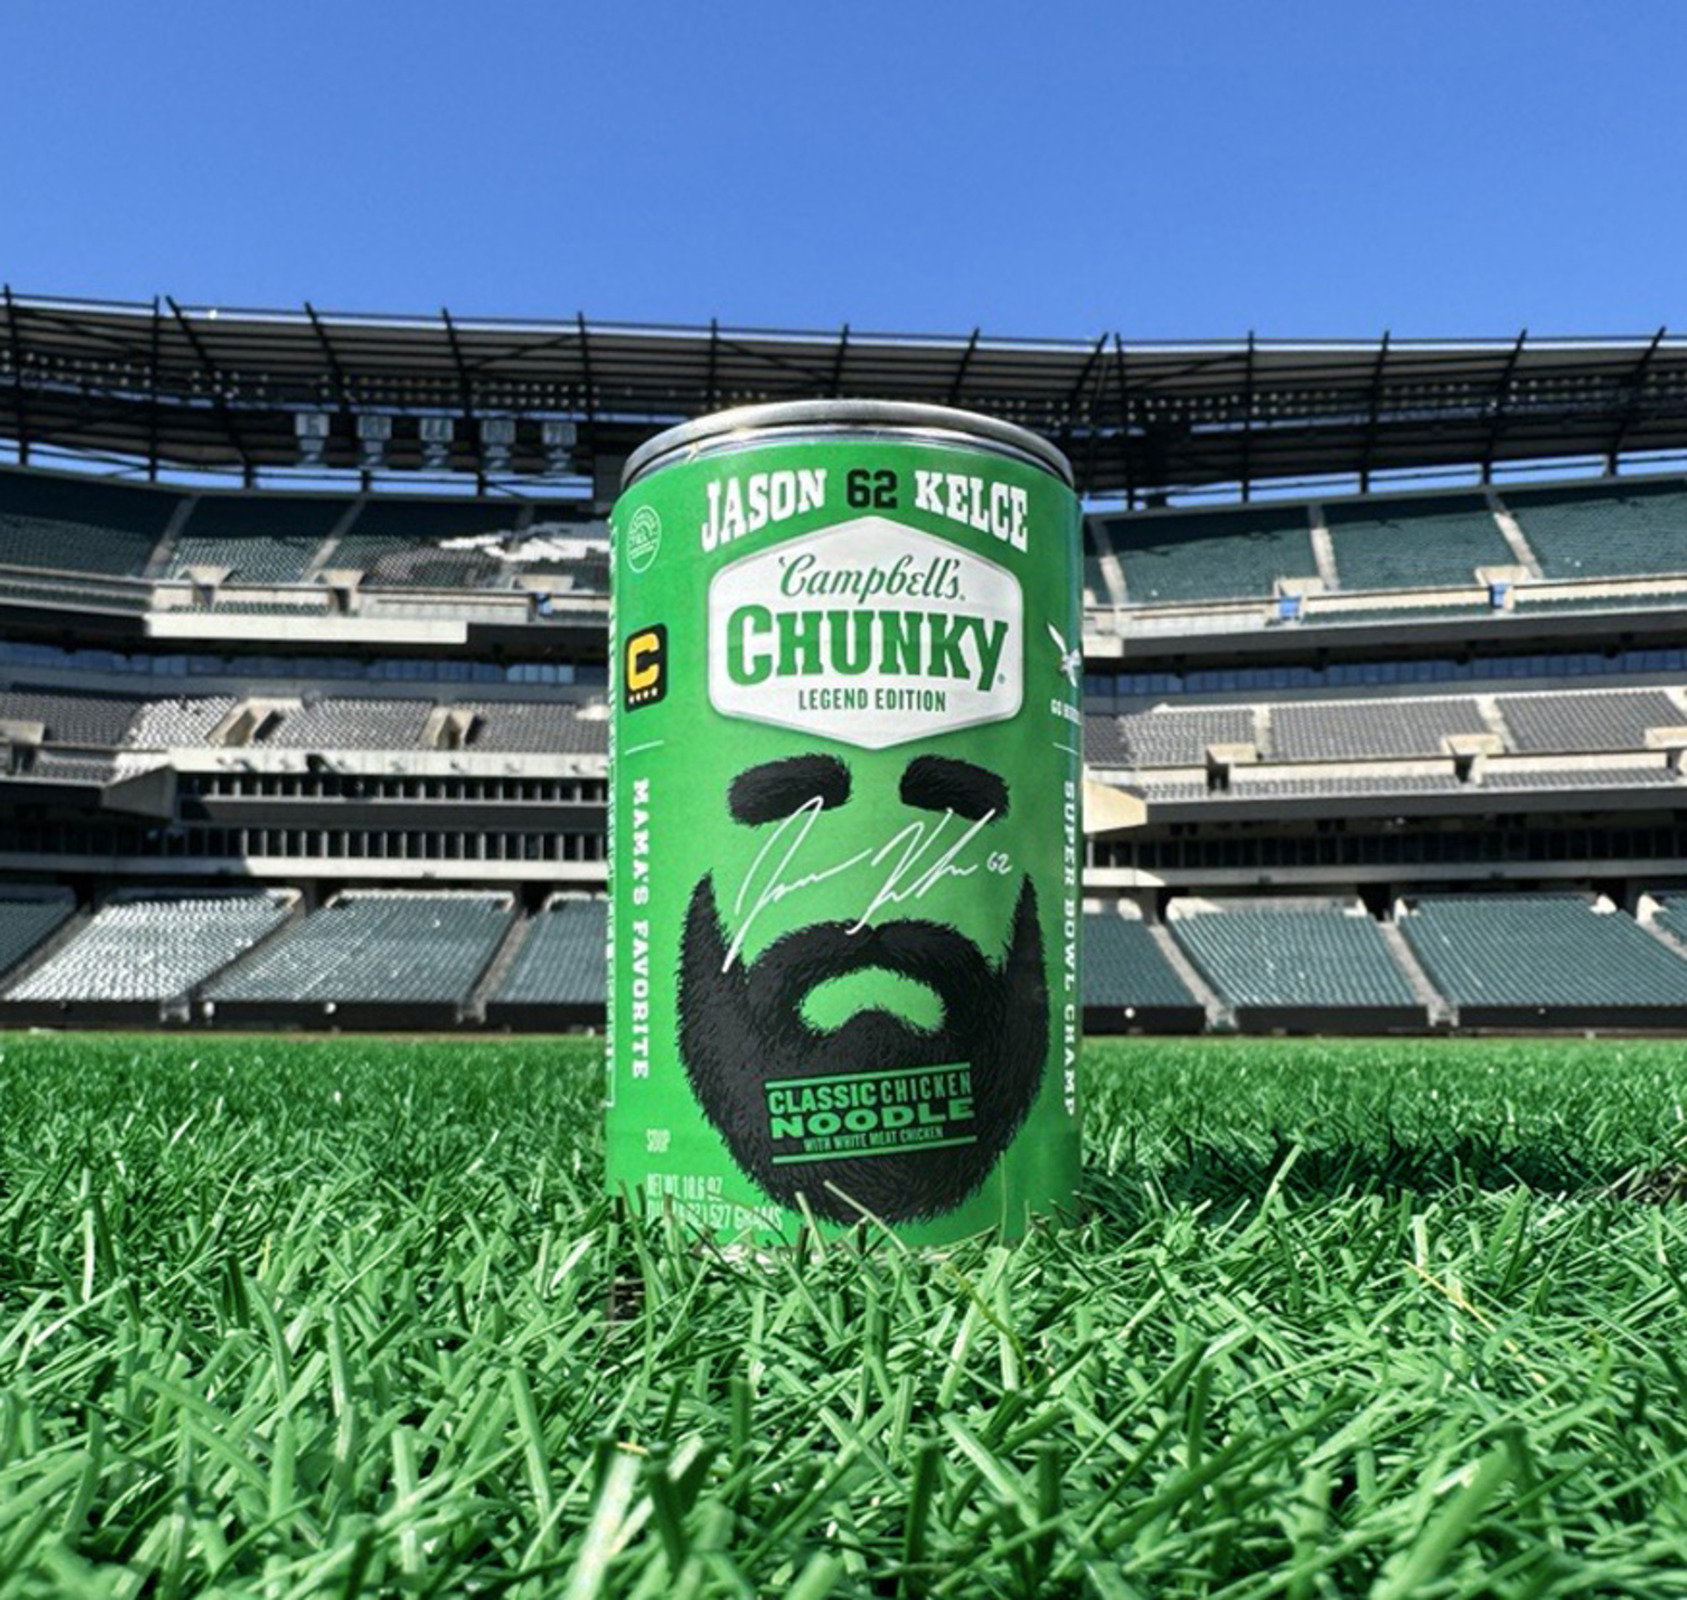 Campbell's Chunky Legend Edition Jason Kelce soup can